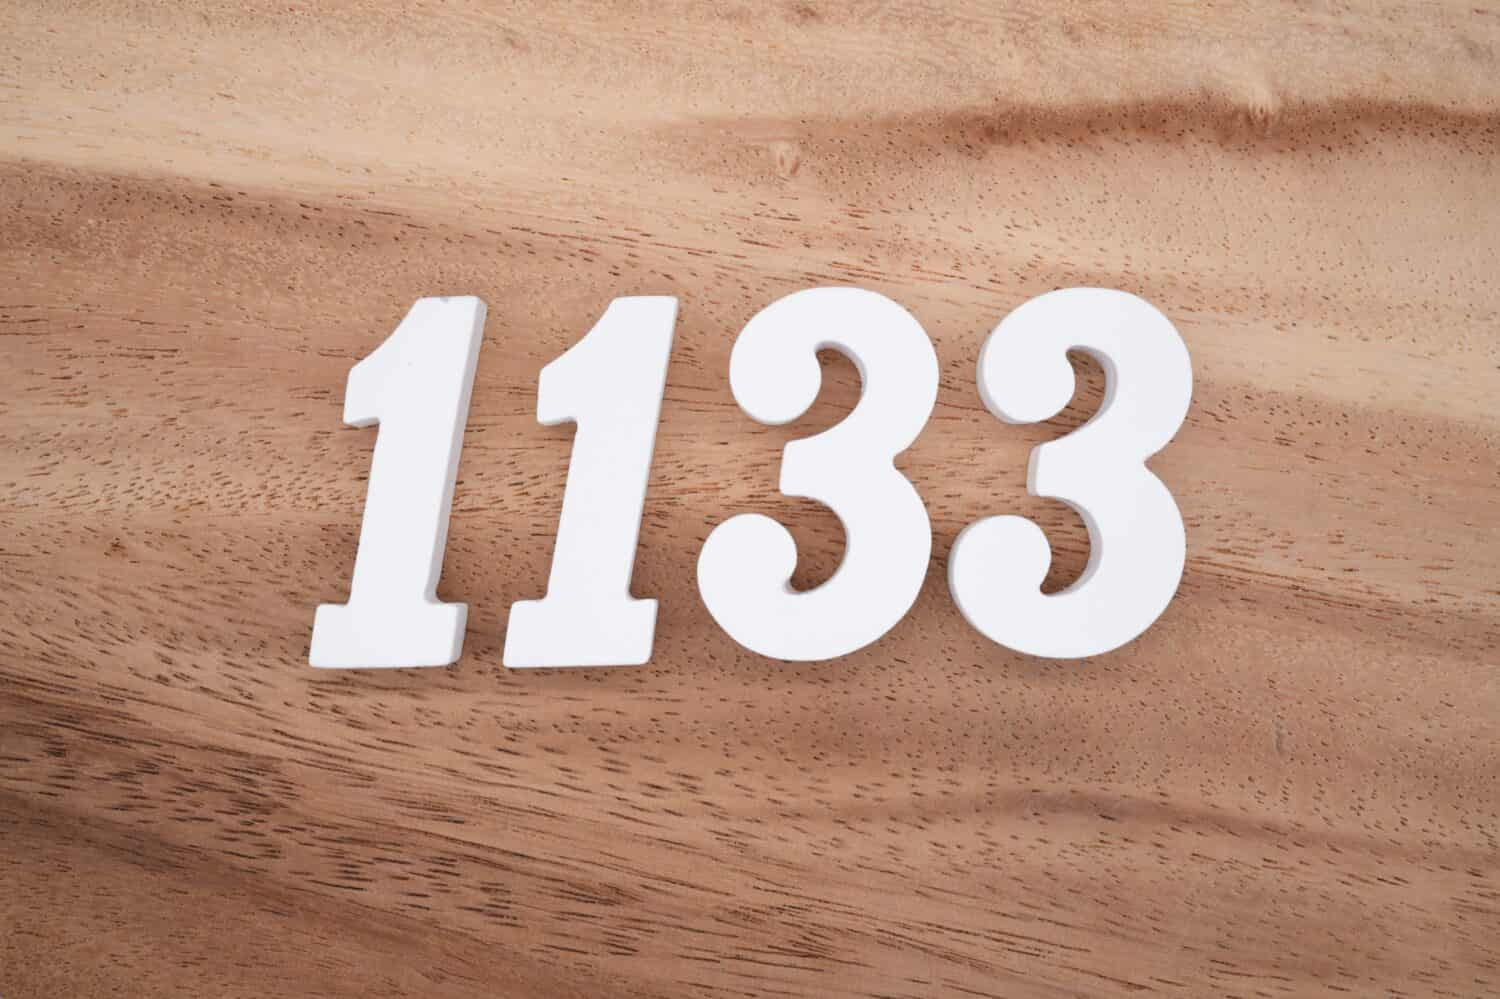 The Meaning And Significance Of Seeing The Number 1133